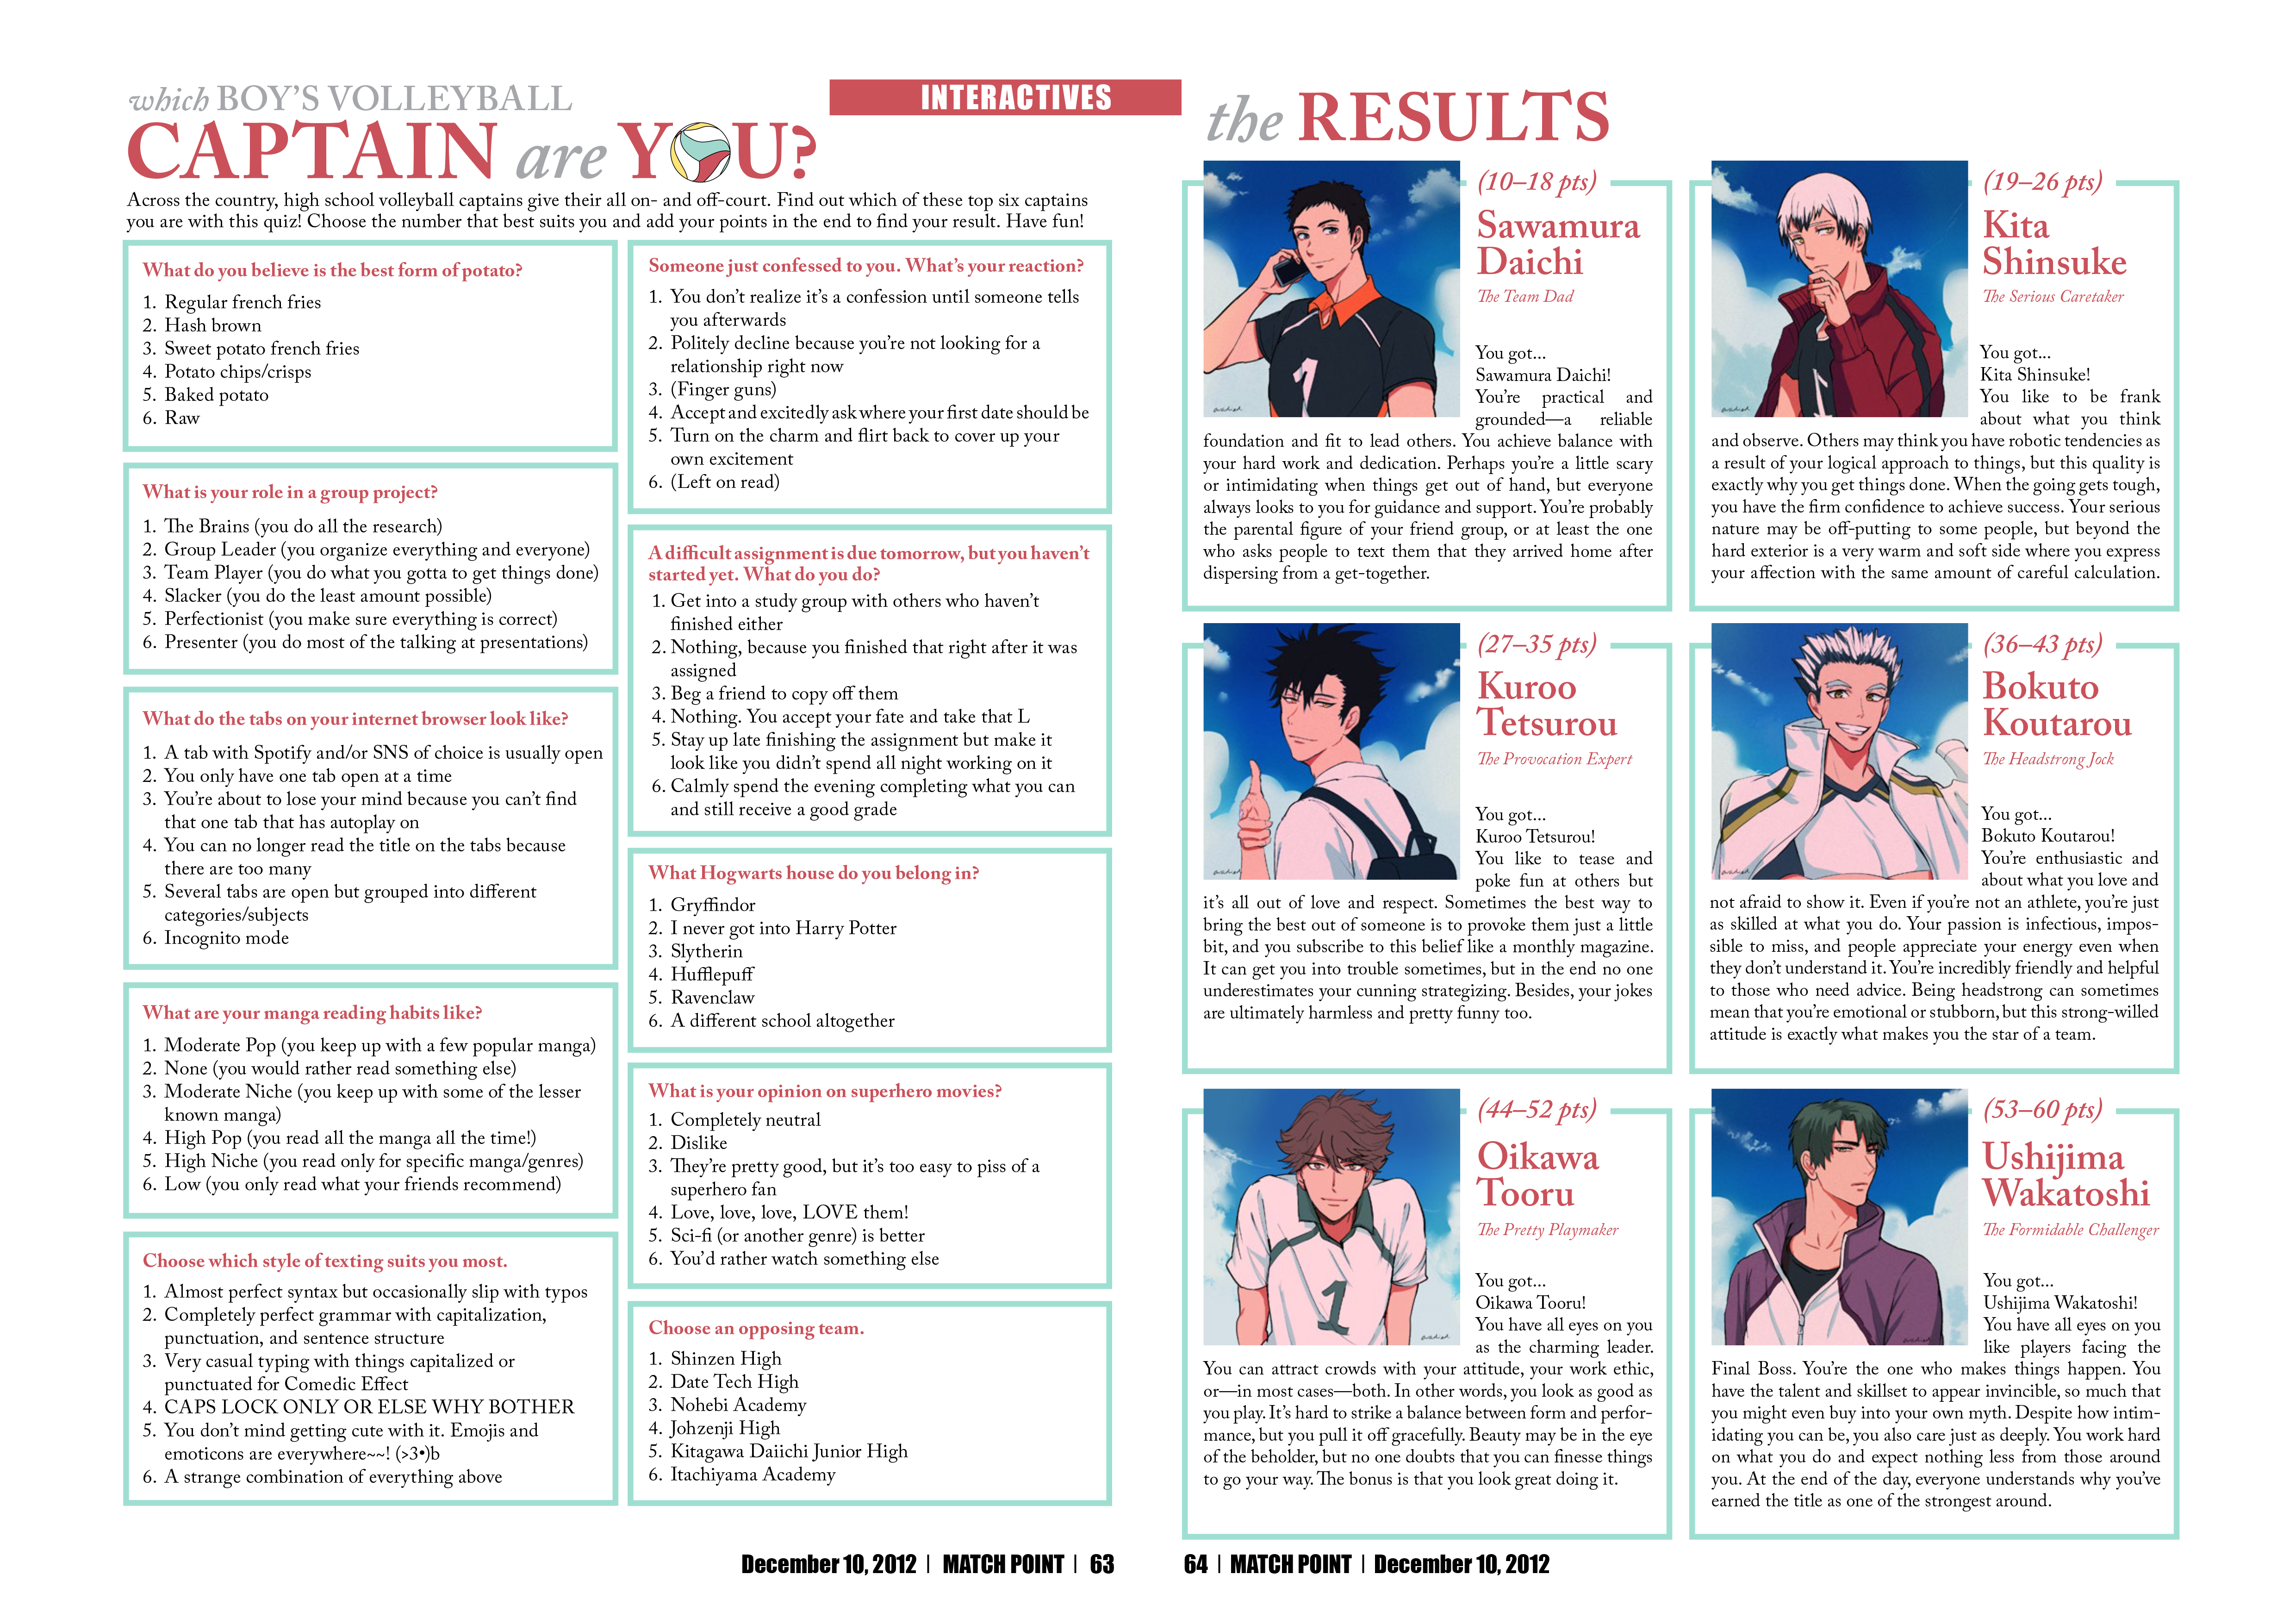 A digital collage of the two quiz pages from the digital magazine.